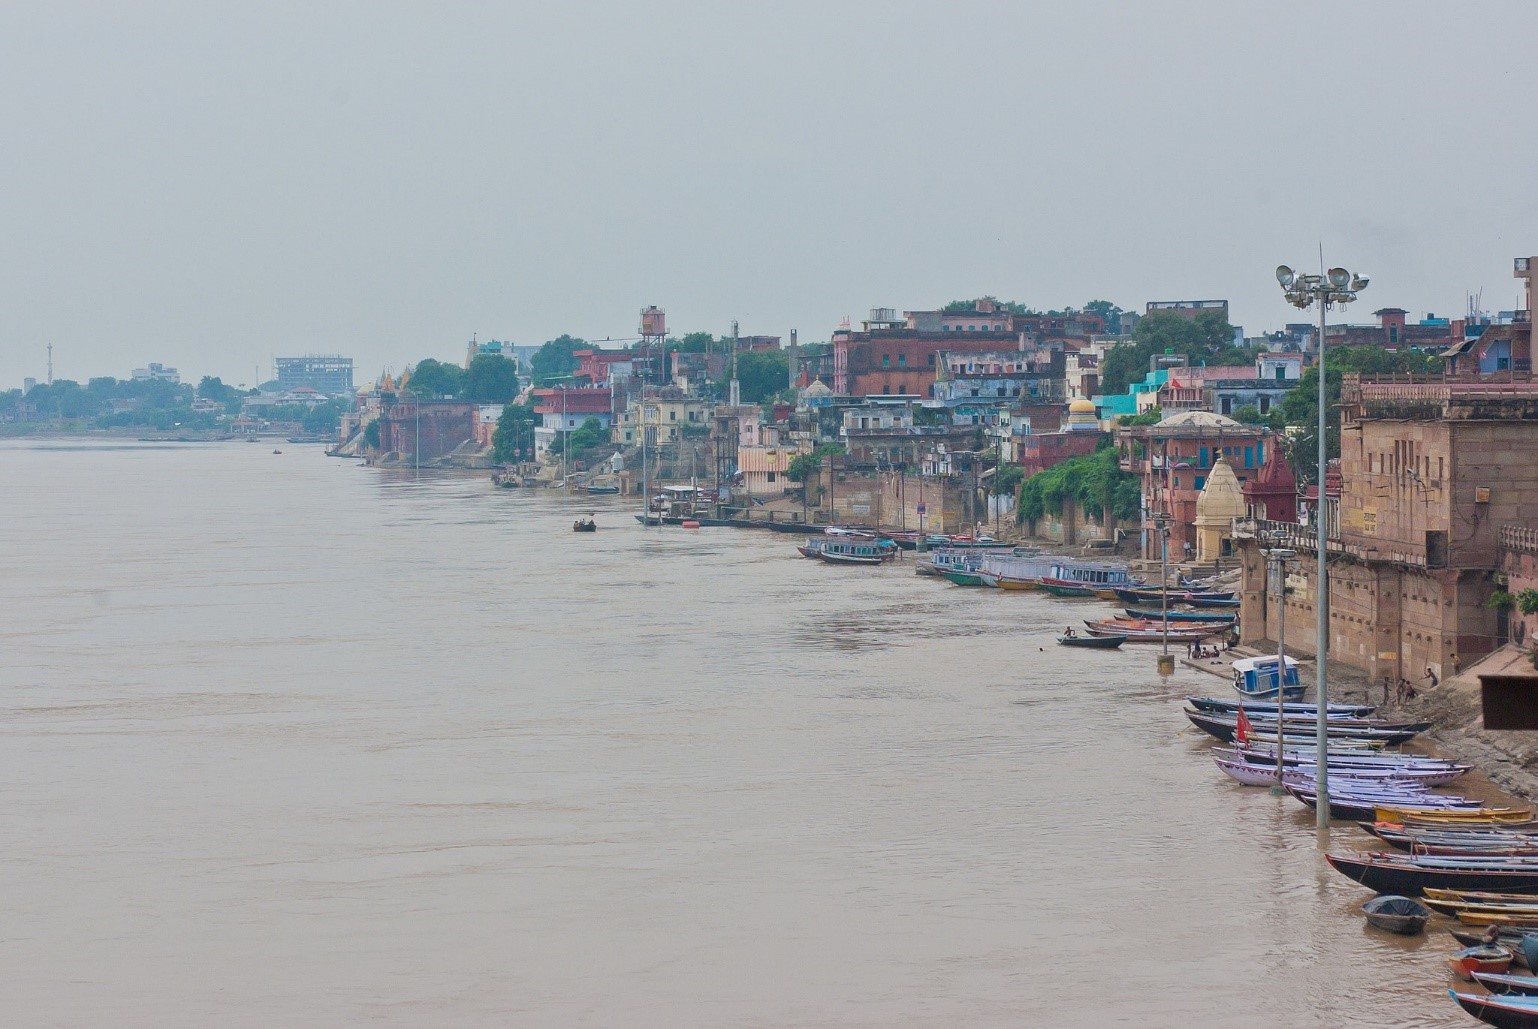 The campaign for clean water in India includes initiatives to clean the Ganges River in Varanasi.